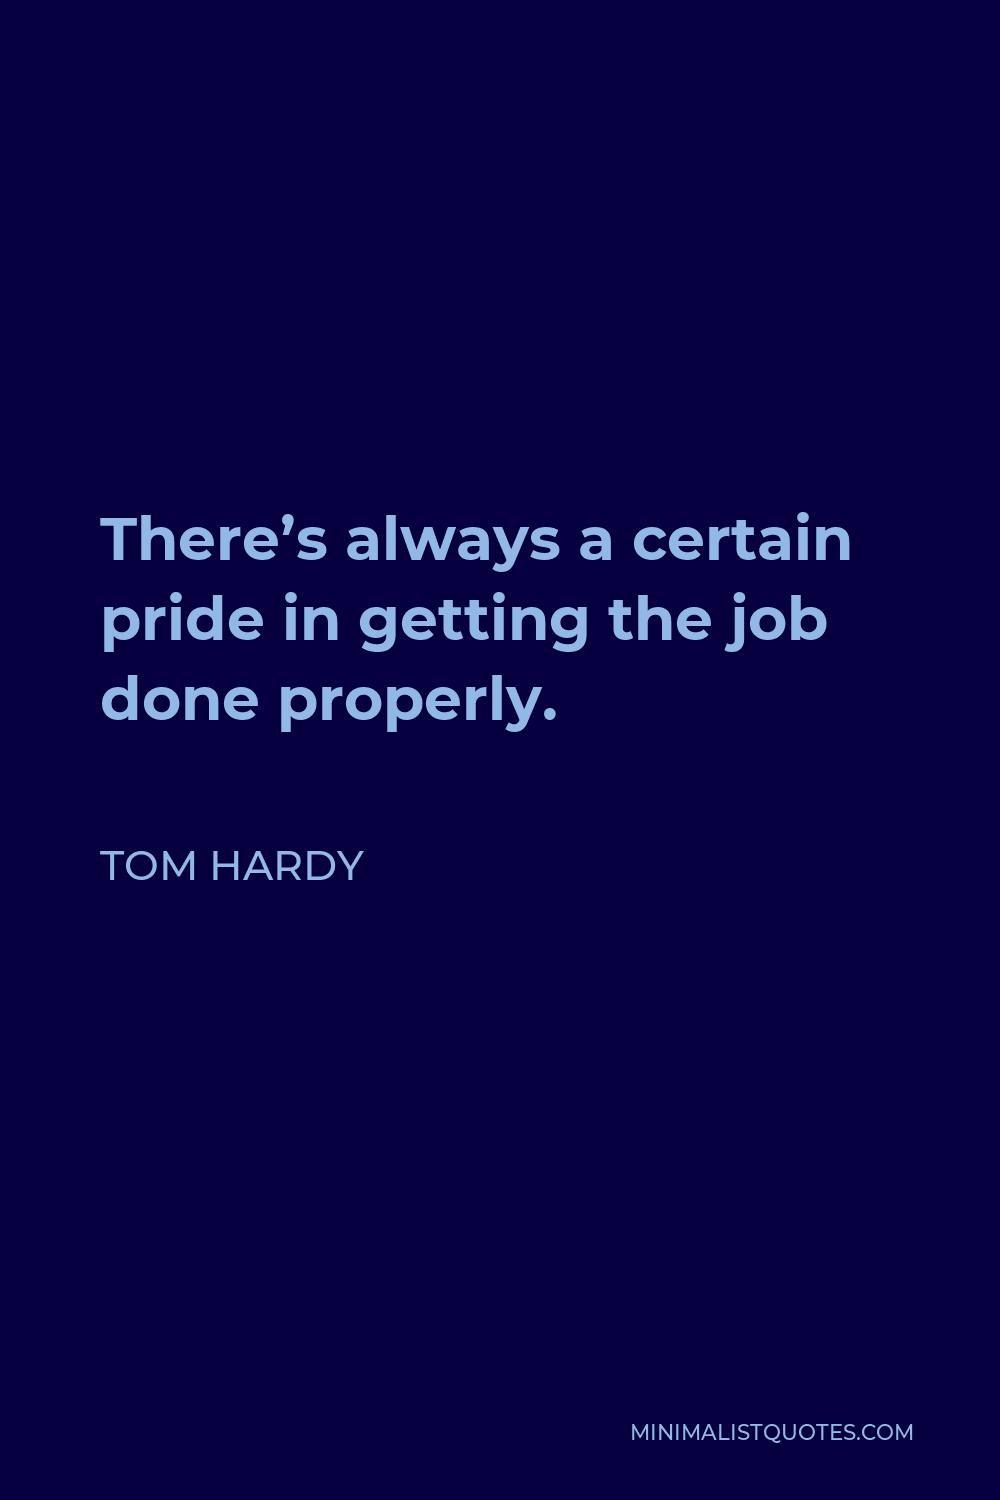 Tom Hardy Quote - There’s always a certain pride in getting the job done properly.